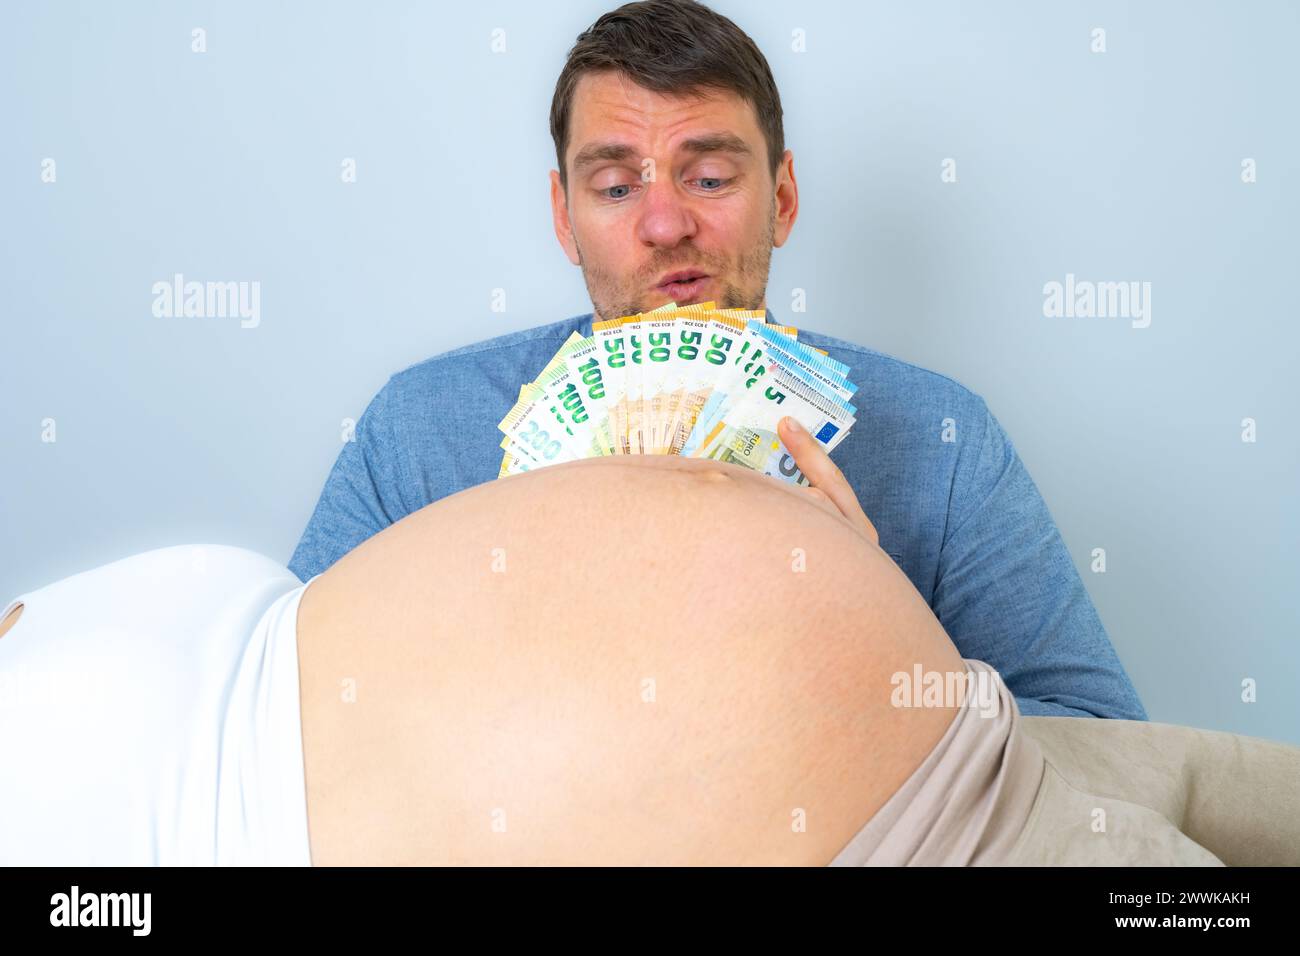 Description: Expectant father behind pregnant baby belly holds a stack of banknotes in front of his face and looks concerned. Last month of pregnancy Stock Photo